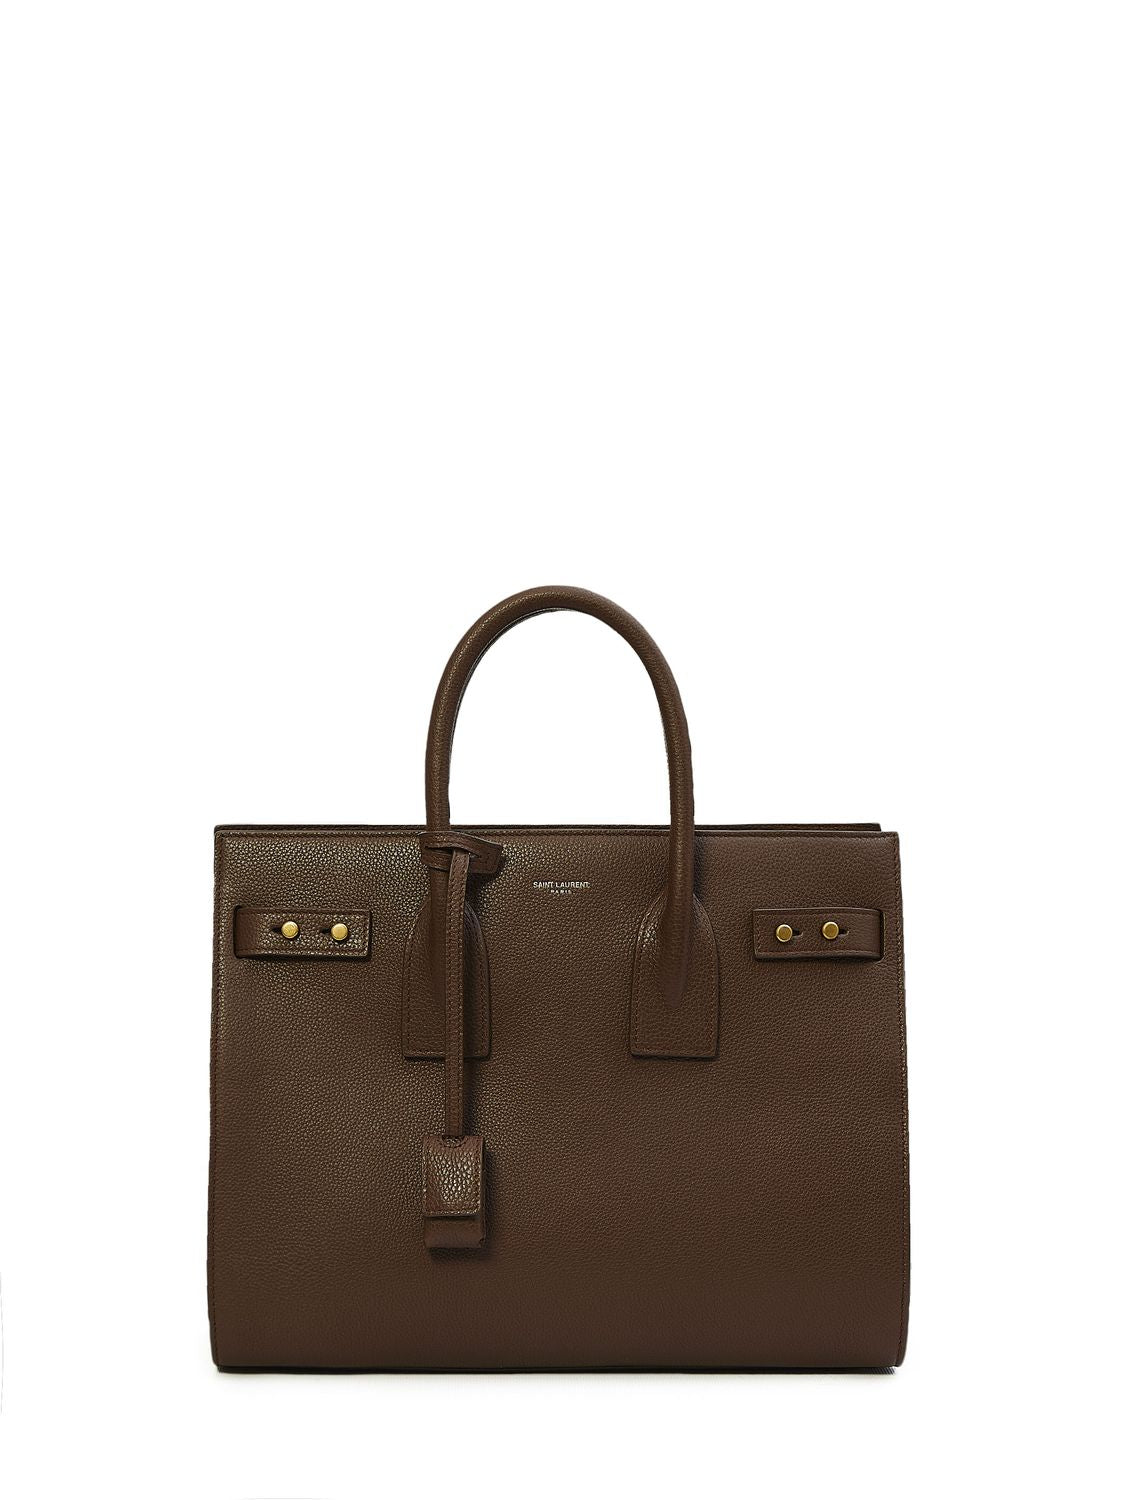 SAINT LAURENT Brown Calf Leather Tote Bag for Women - FW23 Collection